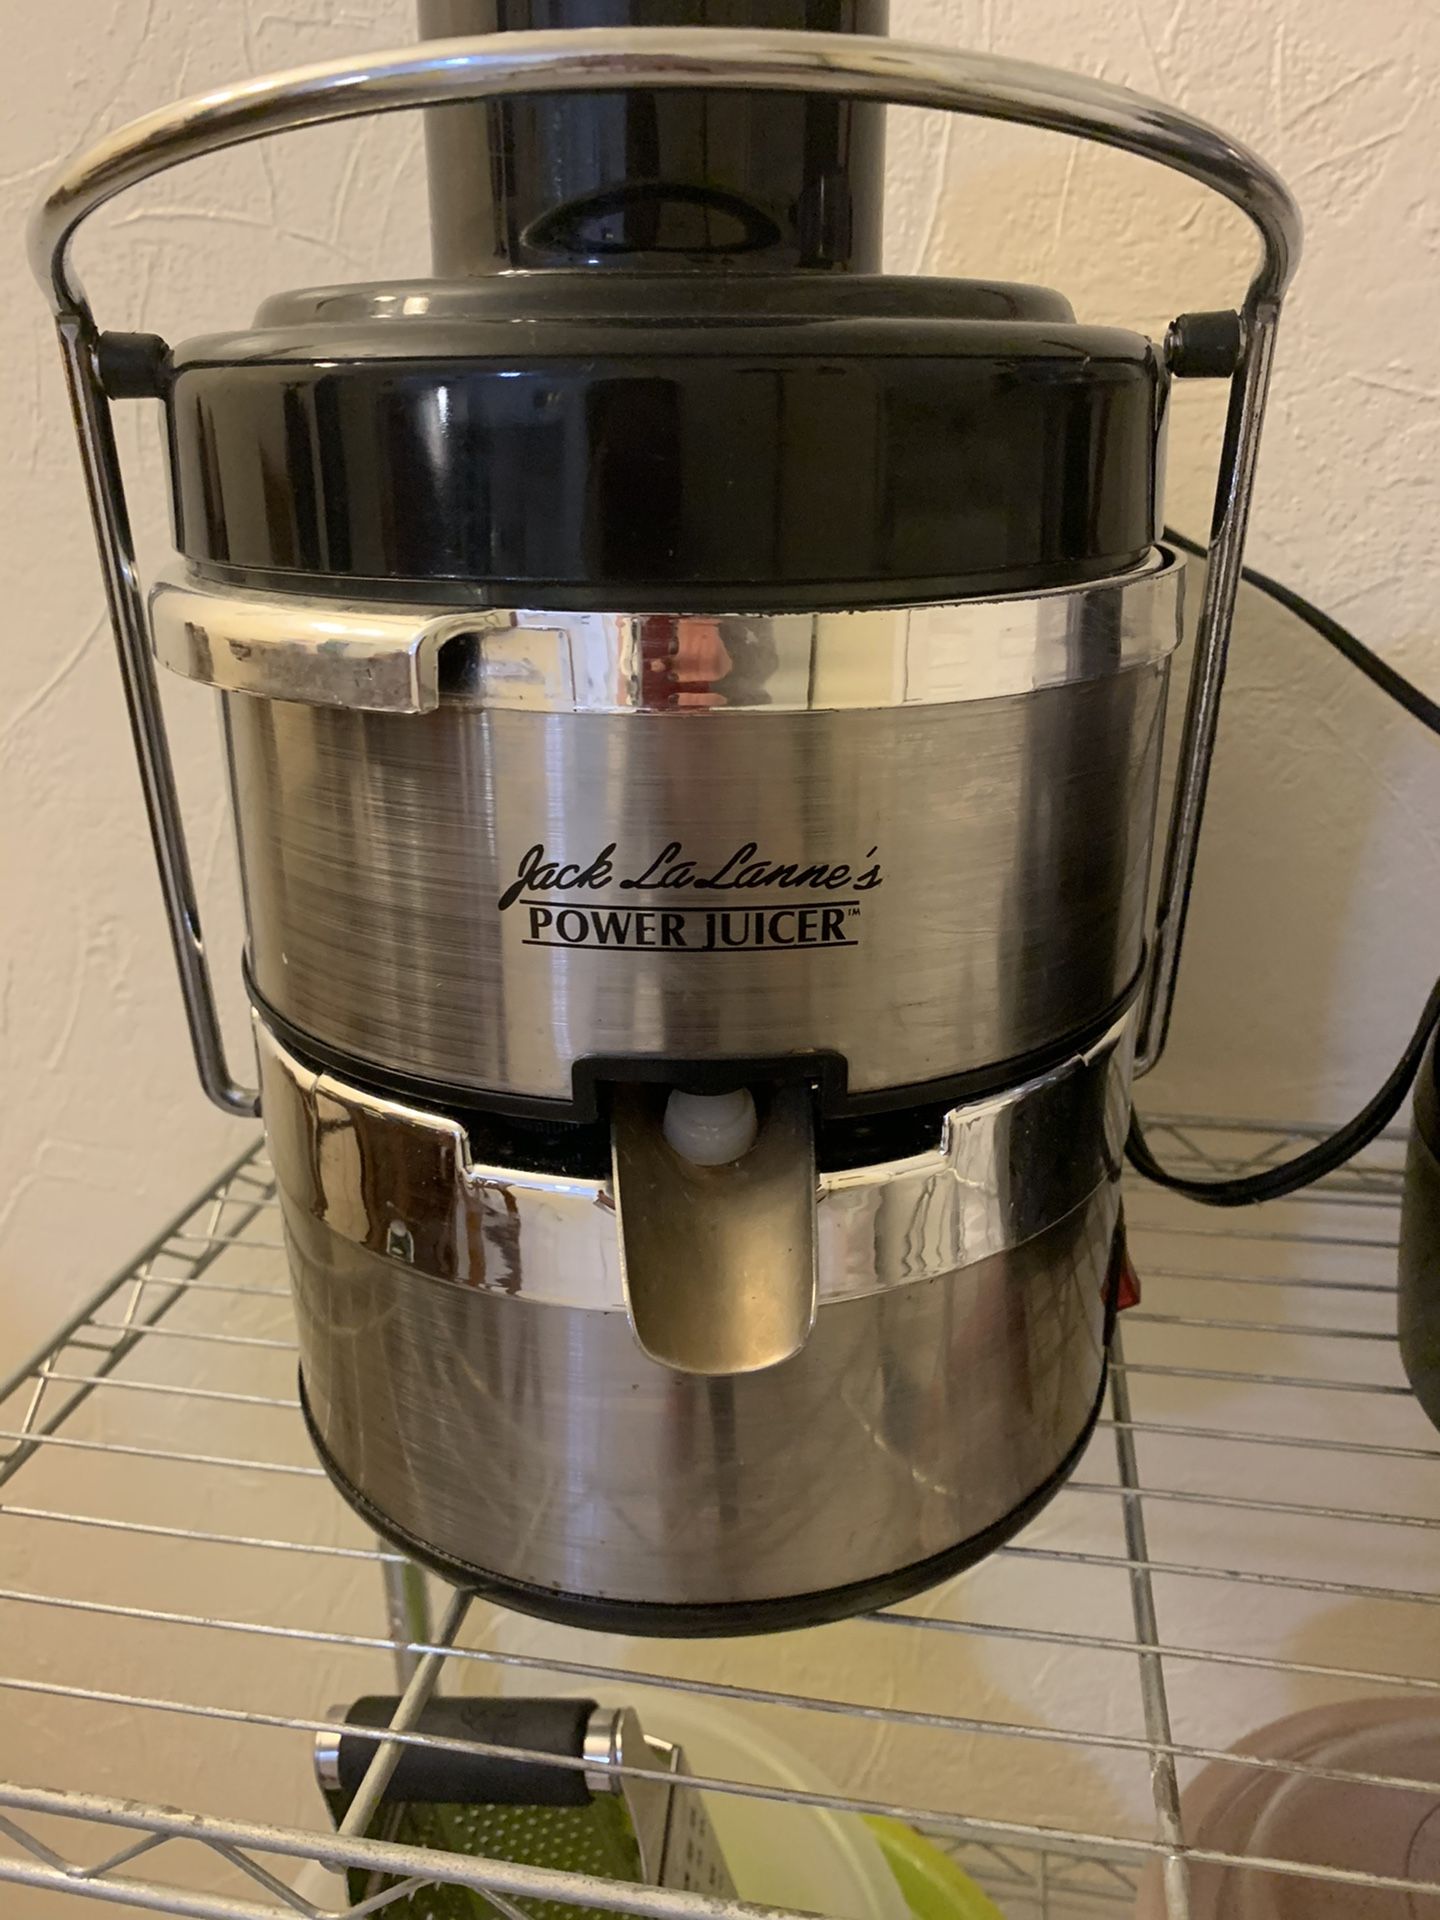 Juicer never used